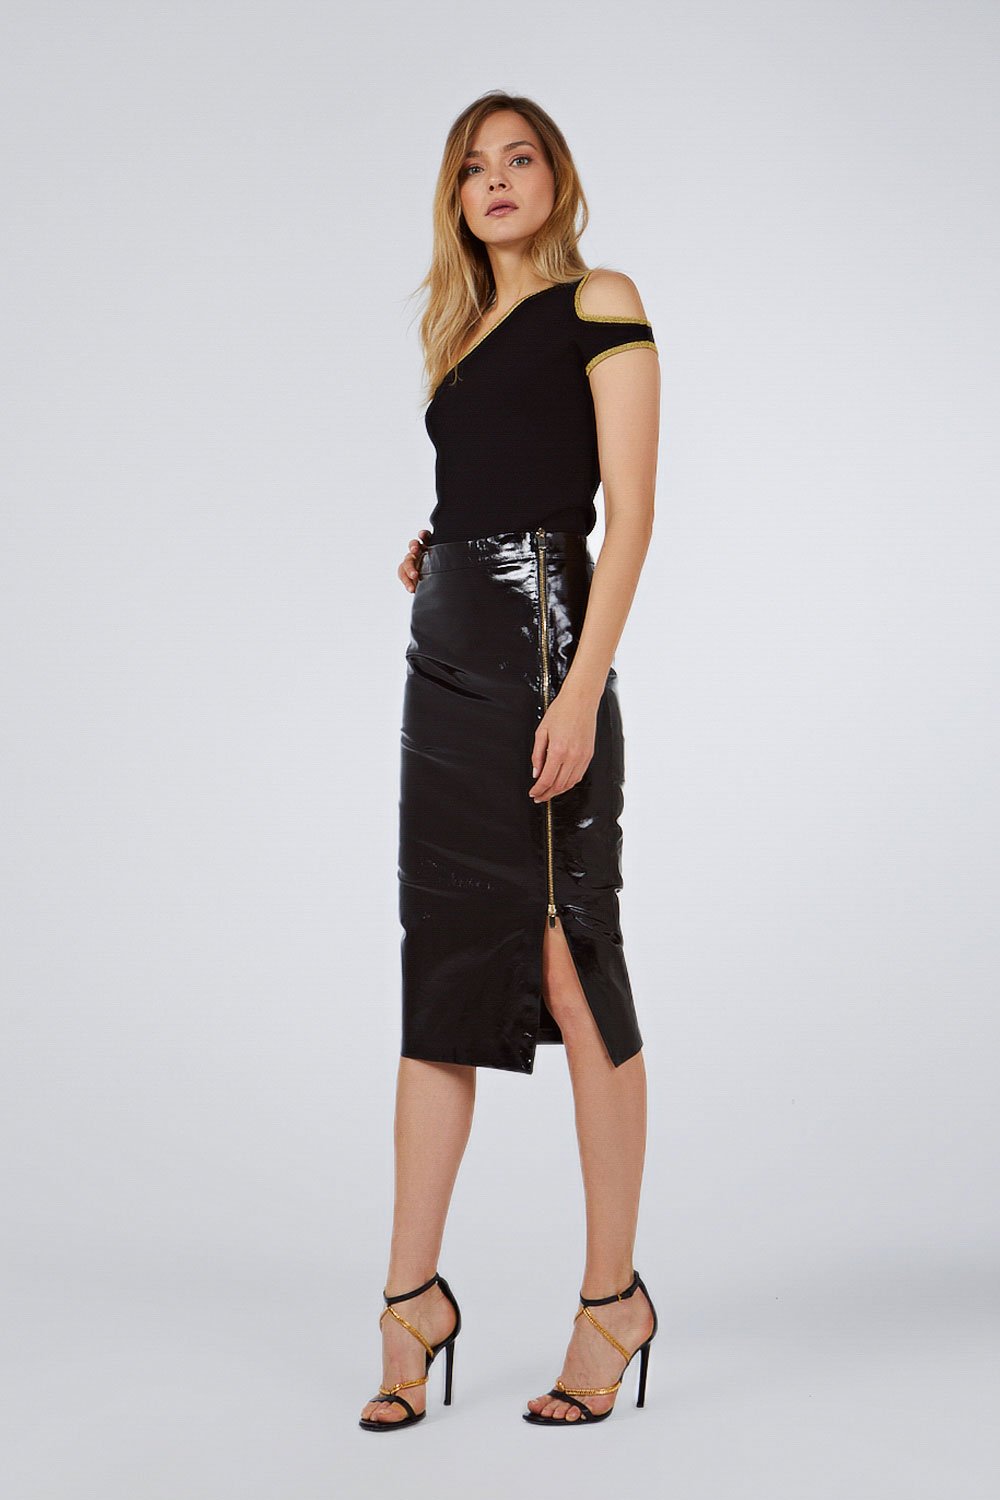 PATENT LEATHER SKIRT